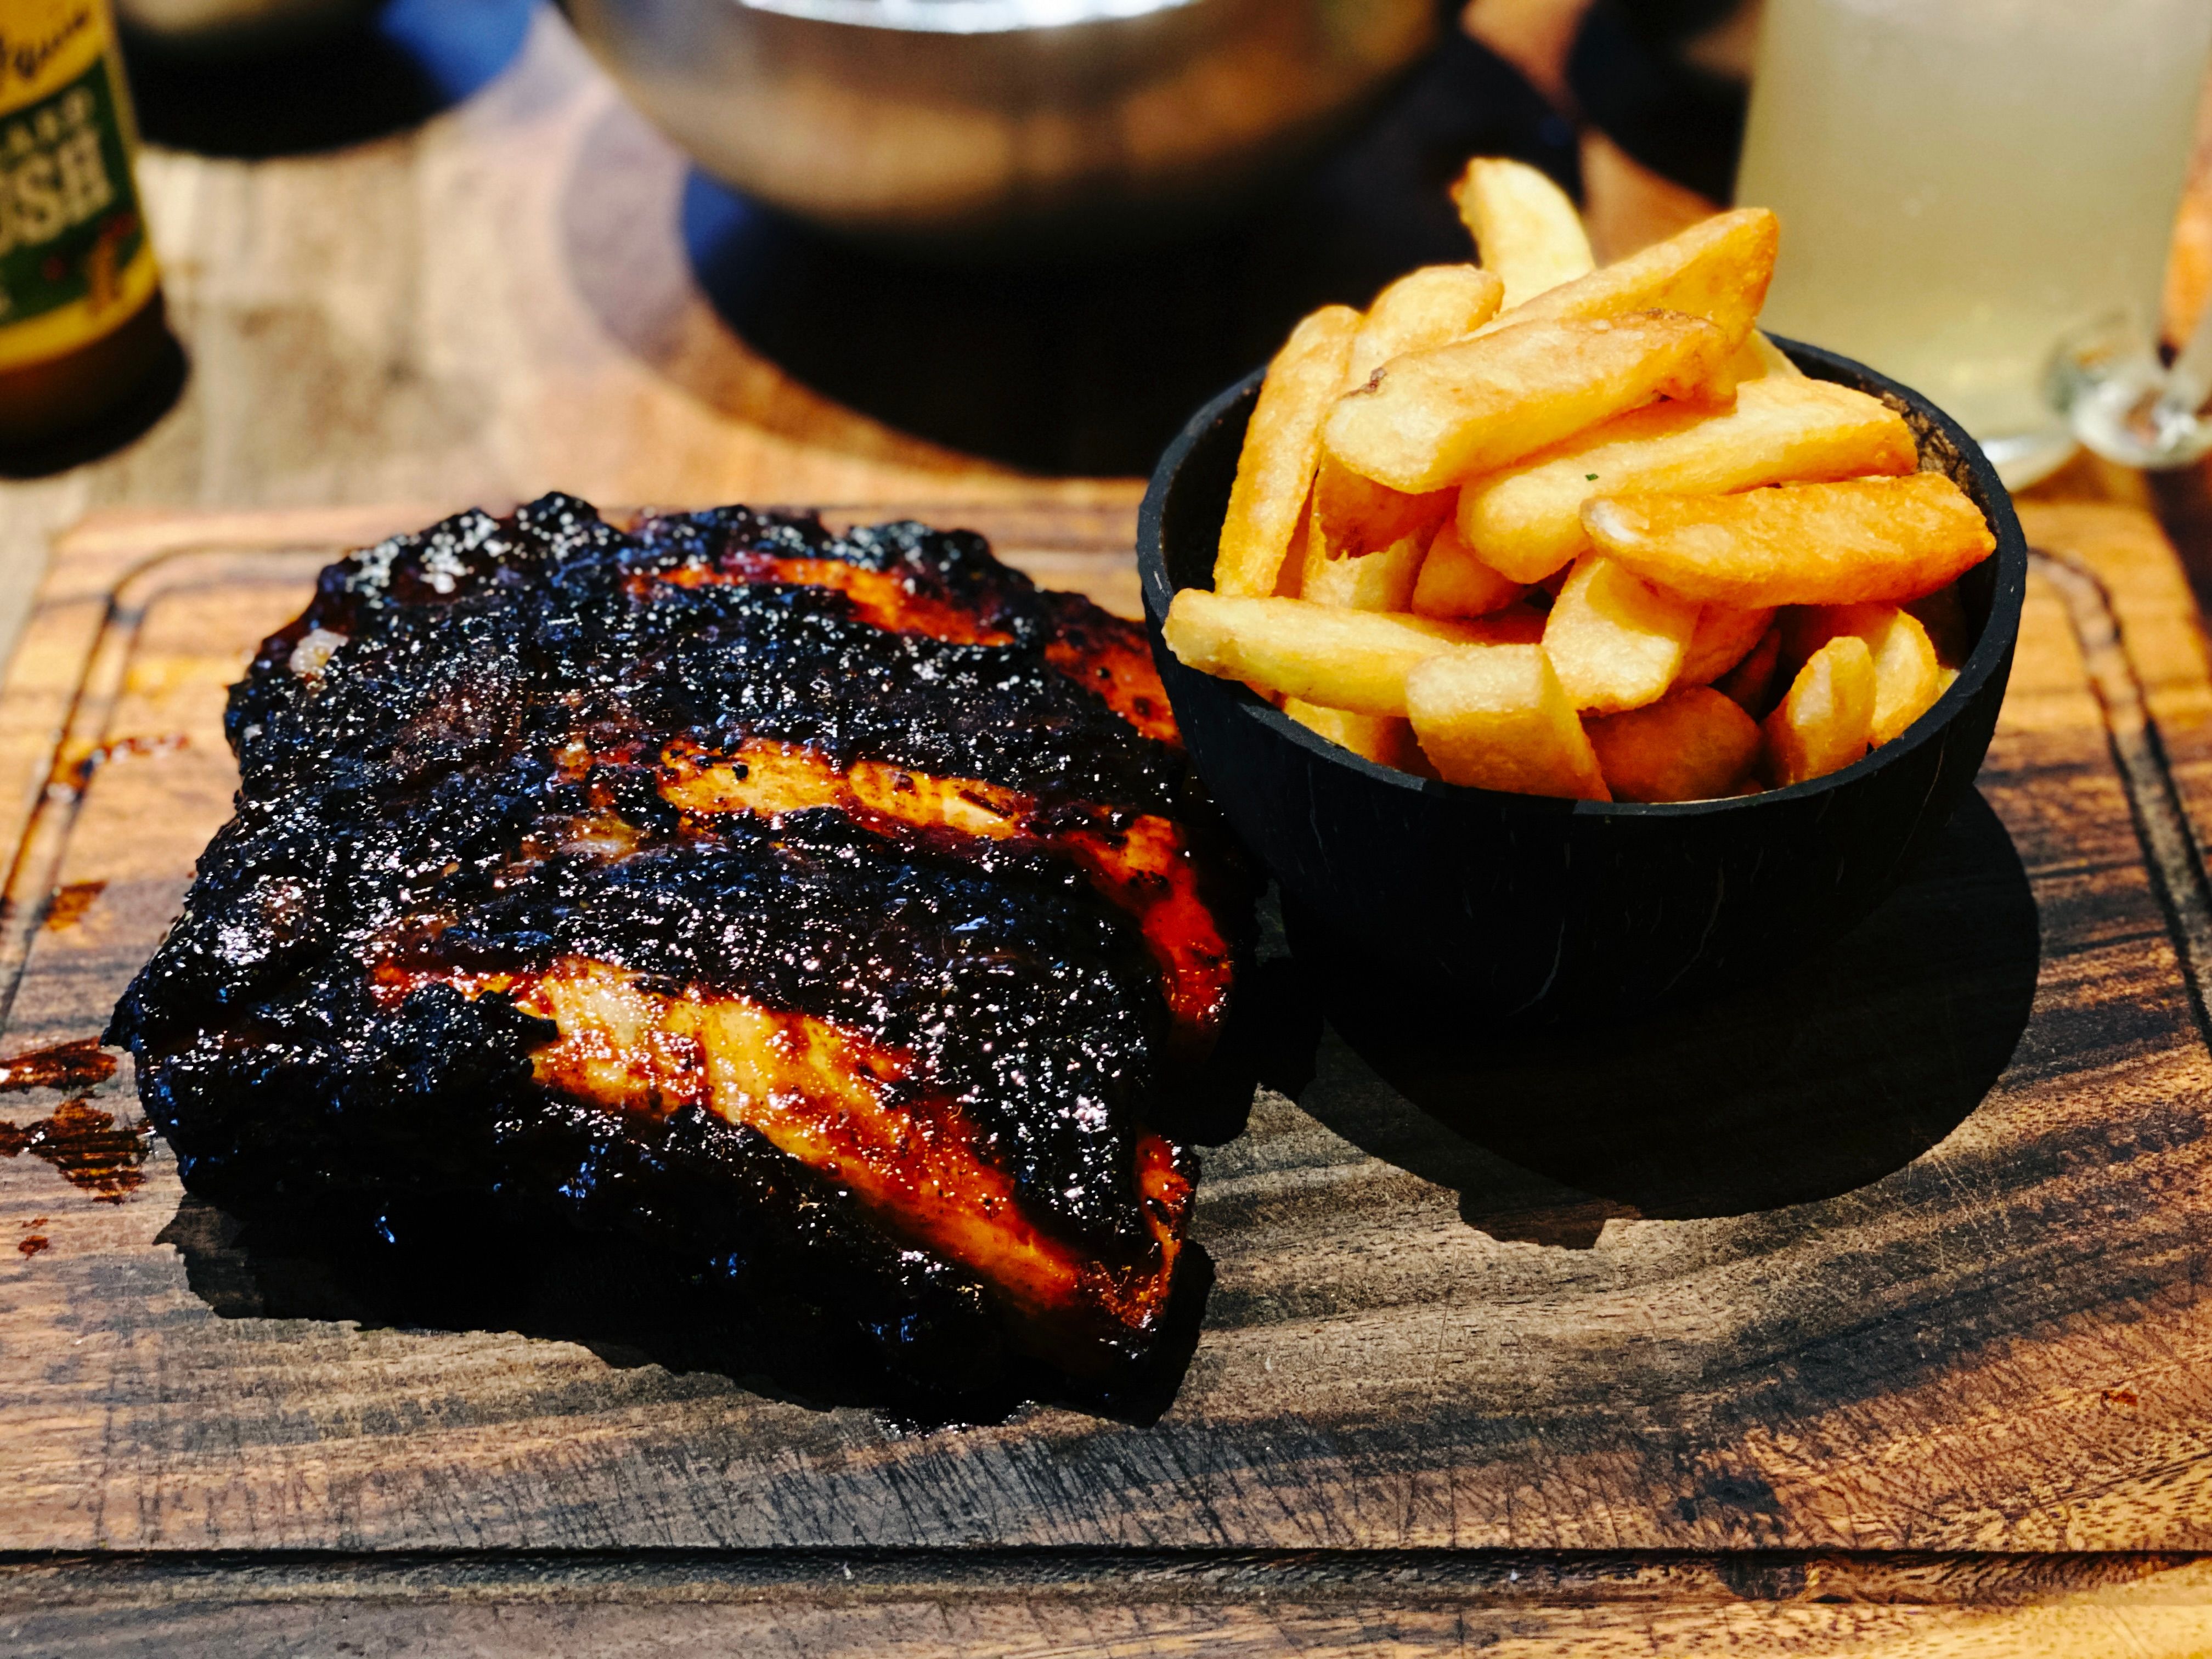 A half rack of deliciously-blackened beef ribs sitting on a wooden serving board, along with a small wooden bowl of chips.